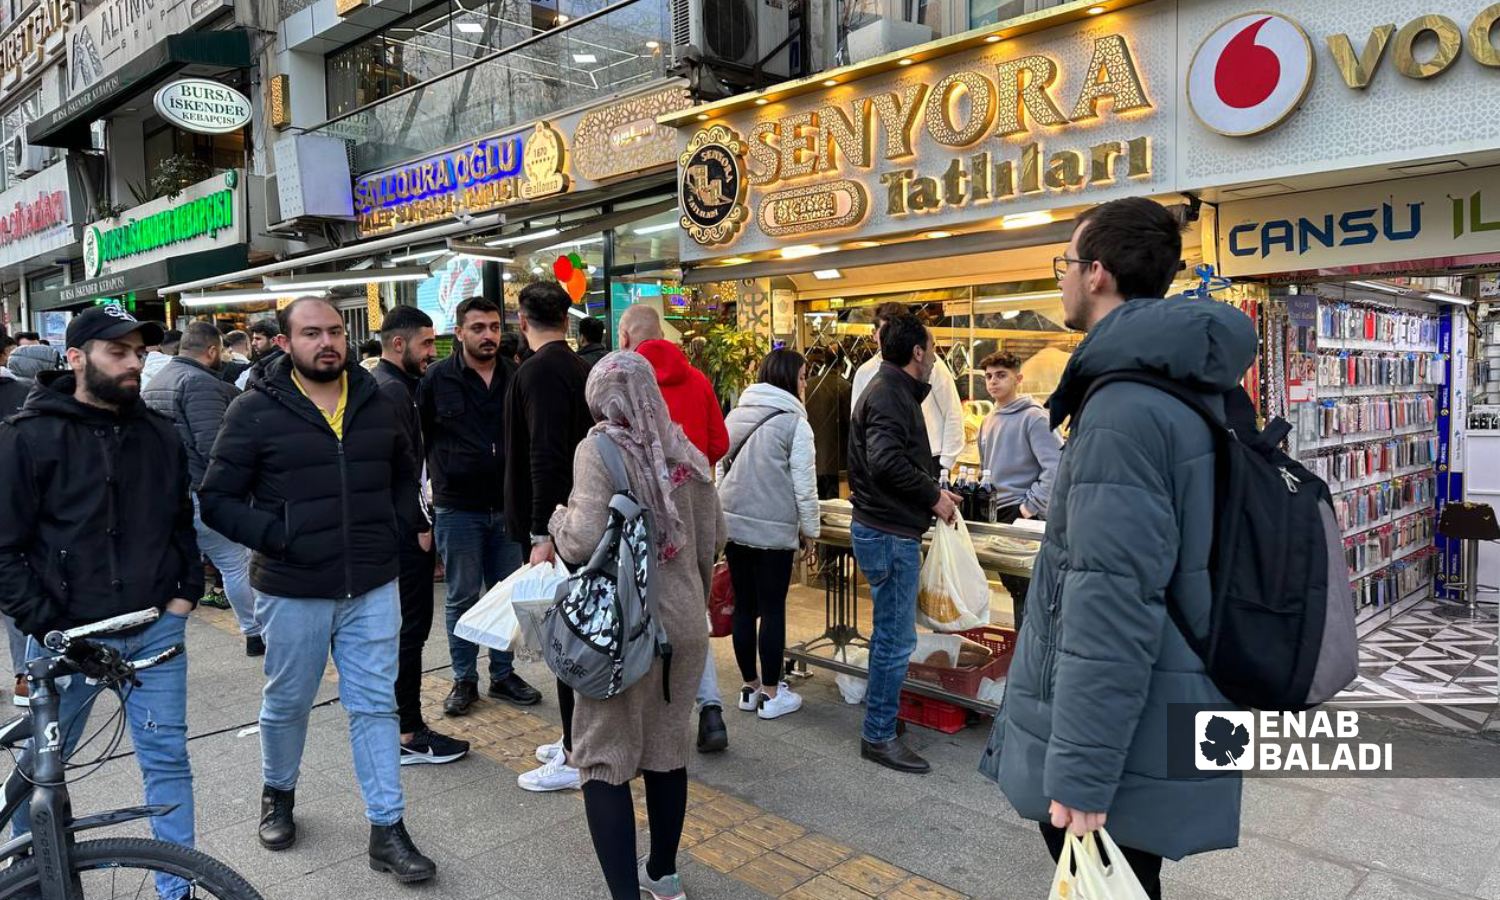 Crowd lining up to buy Ramadan bread (marouk) and drinks in front of a Syrian store in Istanbul - March 23, 2023 (Enab Baladi)